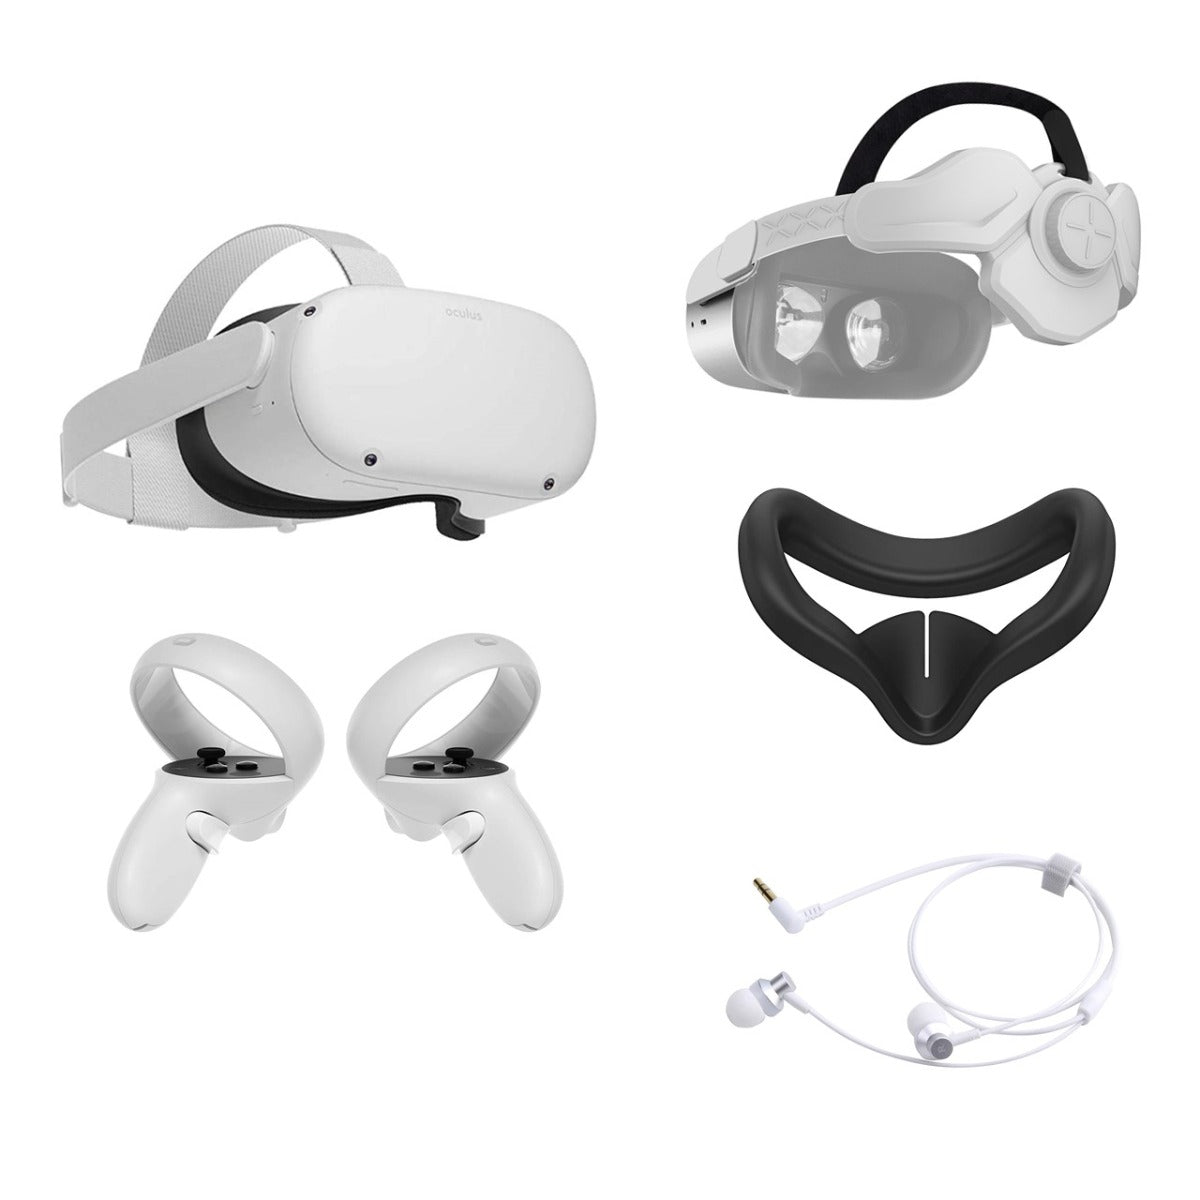 2021 Oculus Quest 2 All-In-One VR Headset, Touch Controllers, 128GB SSD, 1832x1920 up to 90 Hz Refresh Rate LCD, Glasses Compatible, 3D Audio, Mytrix Head Strap, Earphone, Silicone Face Cover